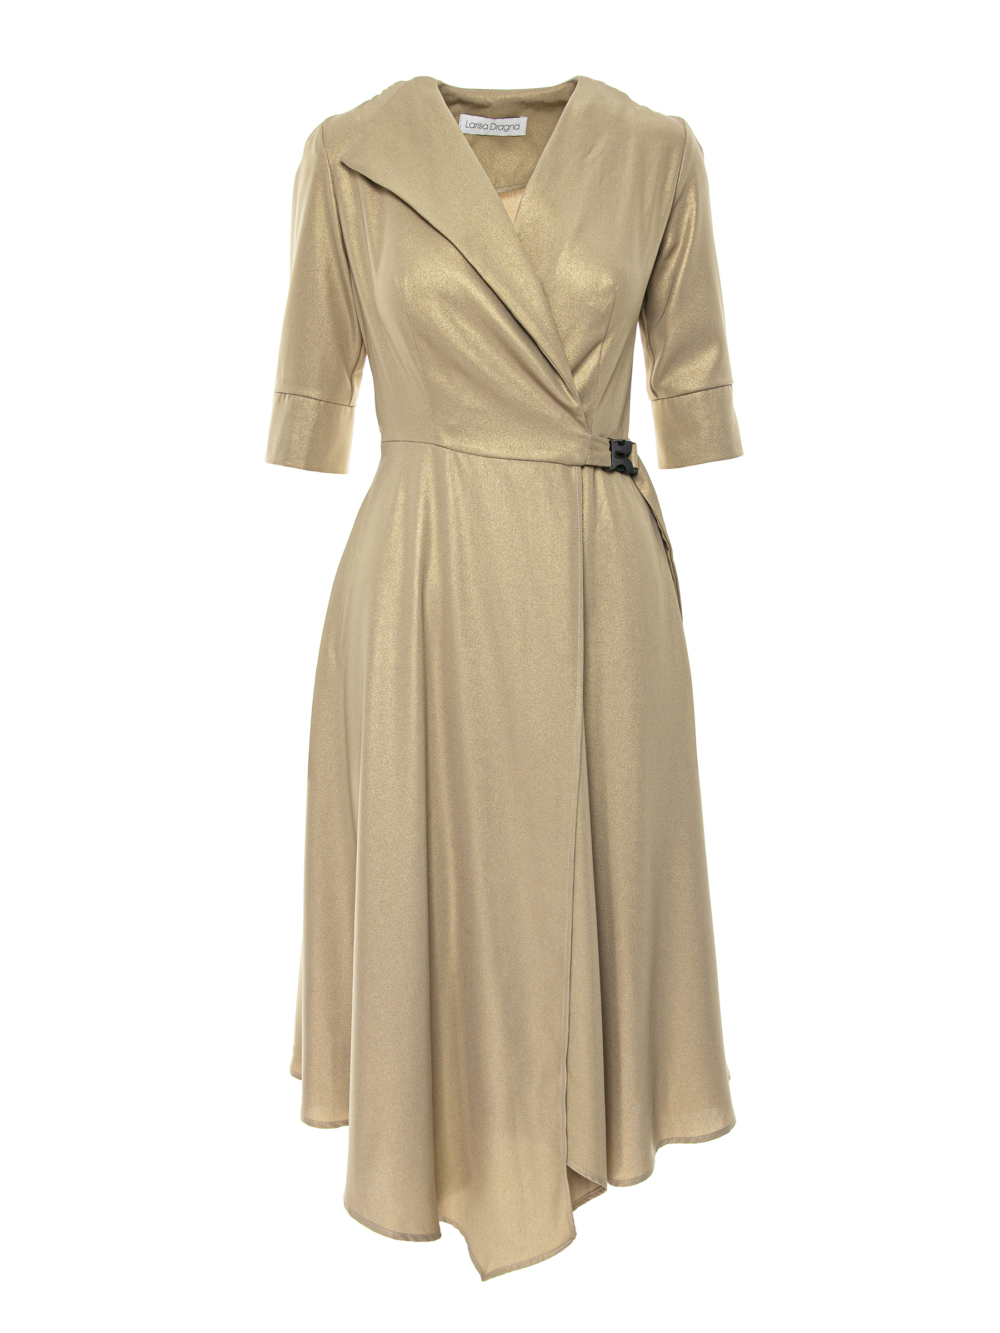 Beige dress with gold patina and asymmetric hem